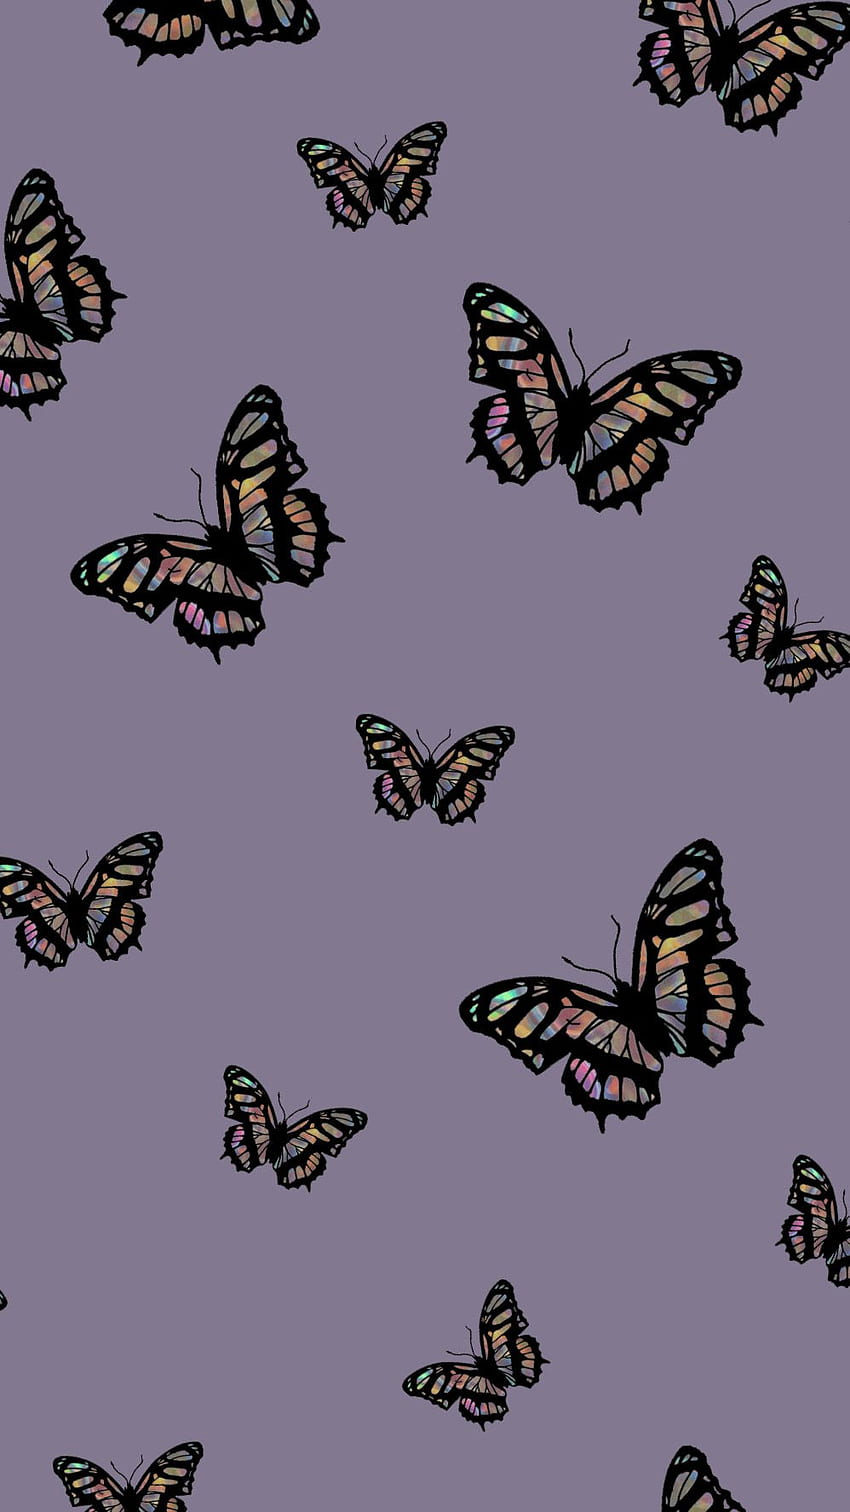 Butterfly Louis Vuitton Wallpapers  Butterfly wallpaper iphone, Louis  vuitton iphone wallpaper, Iphone wallpaper tumblr aesthetic